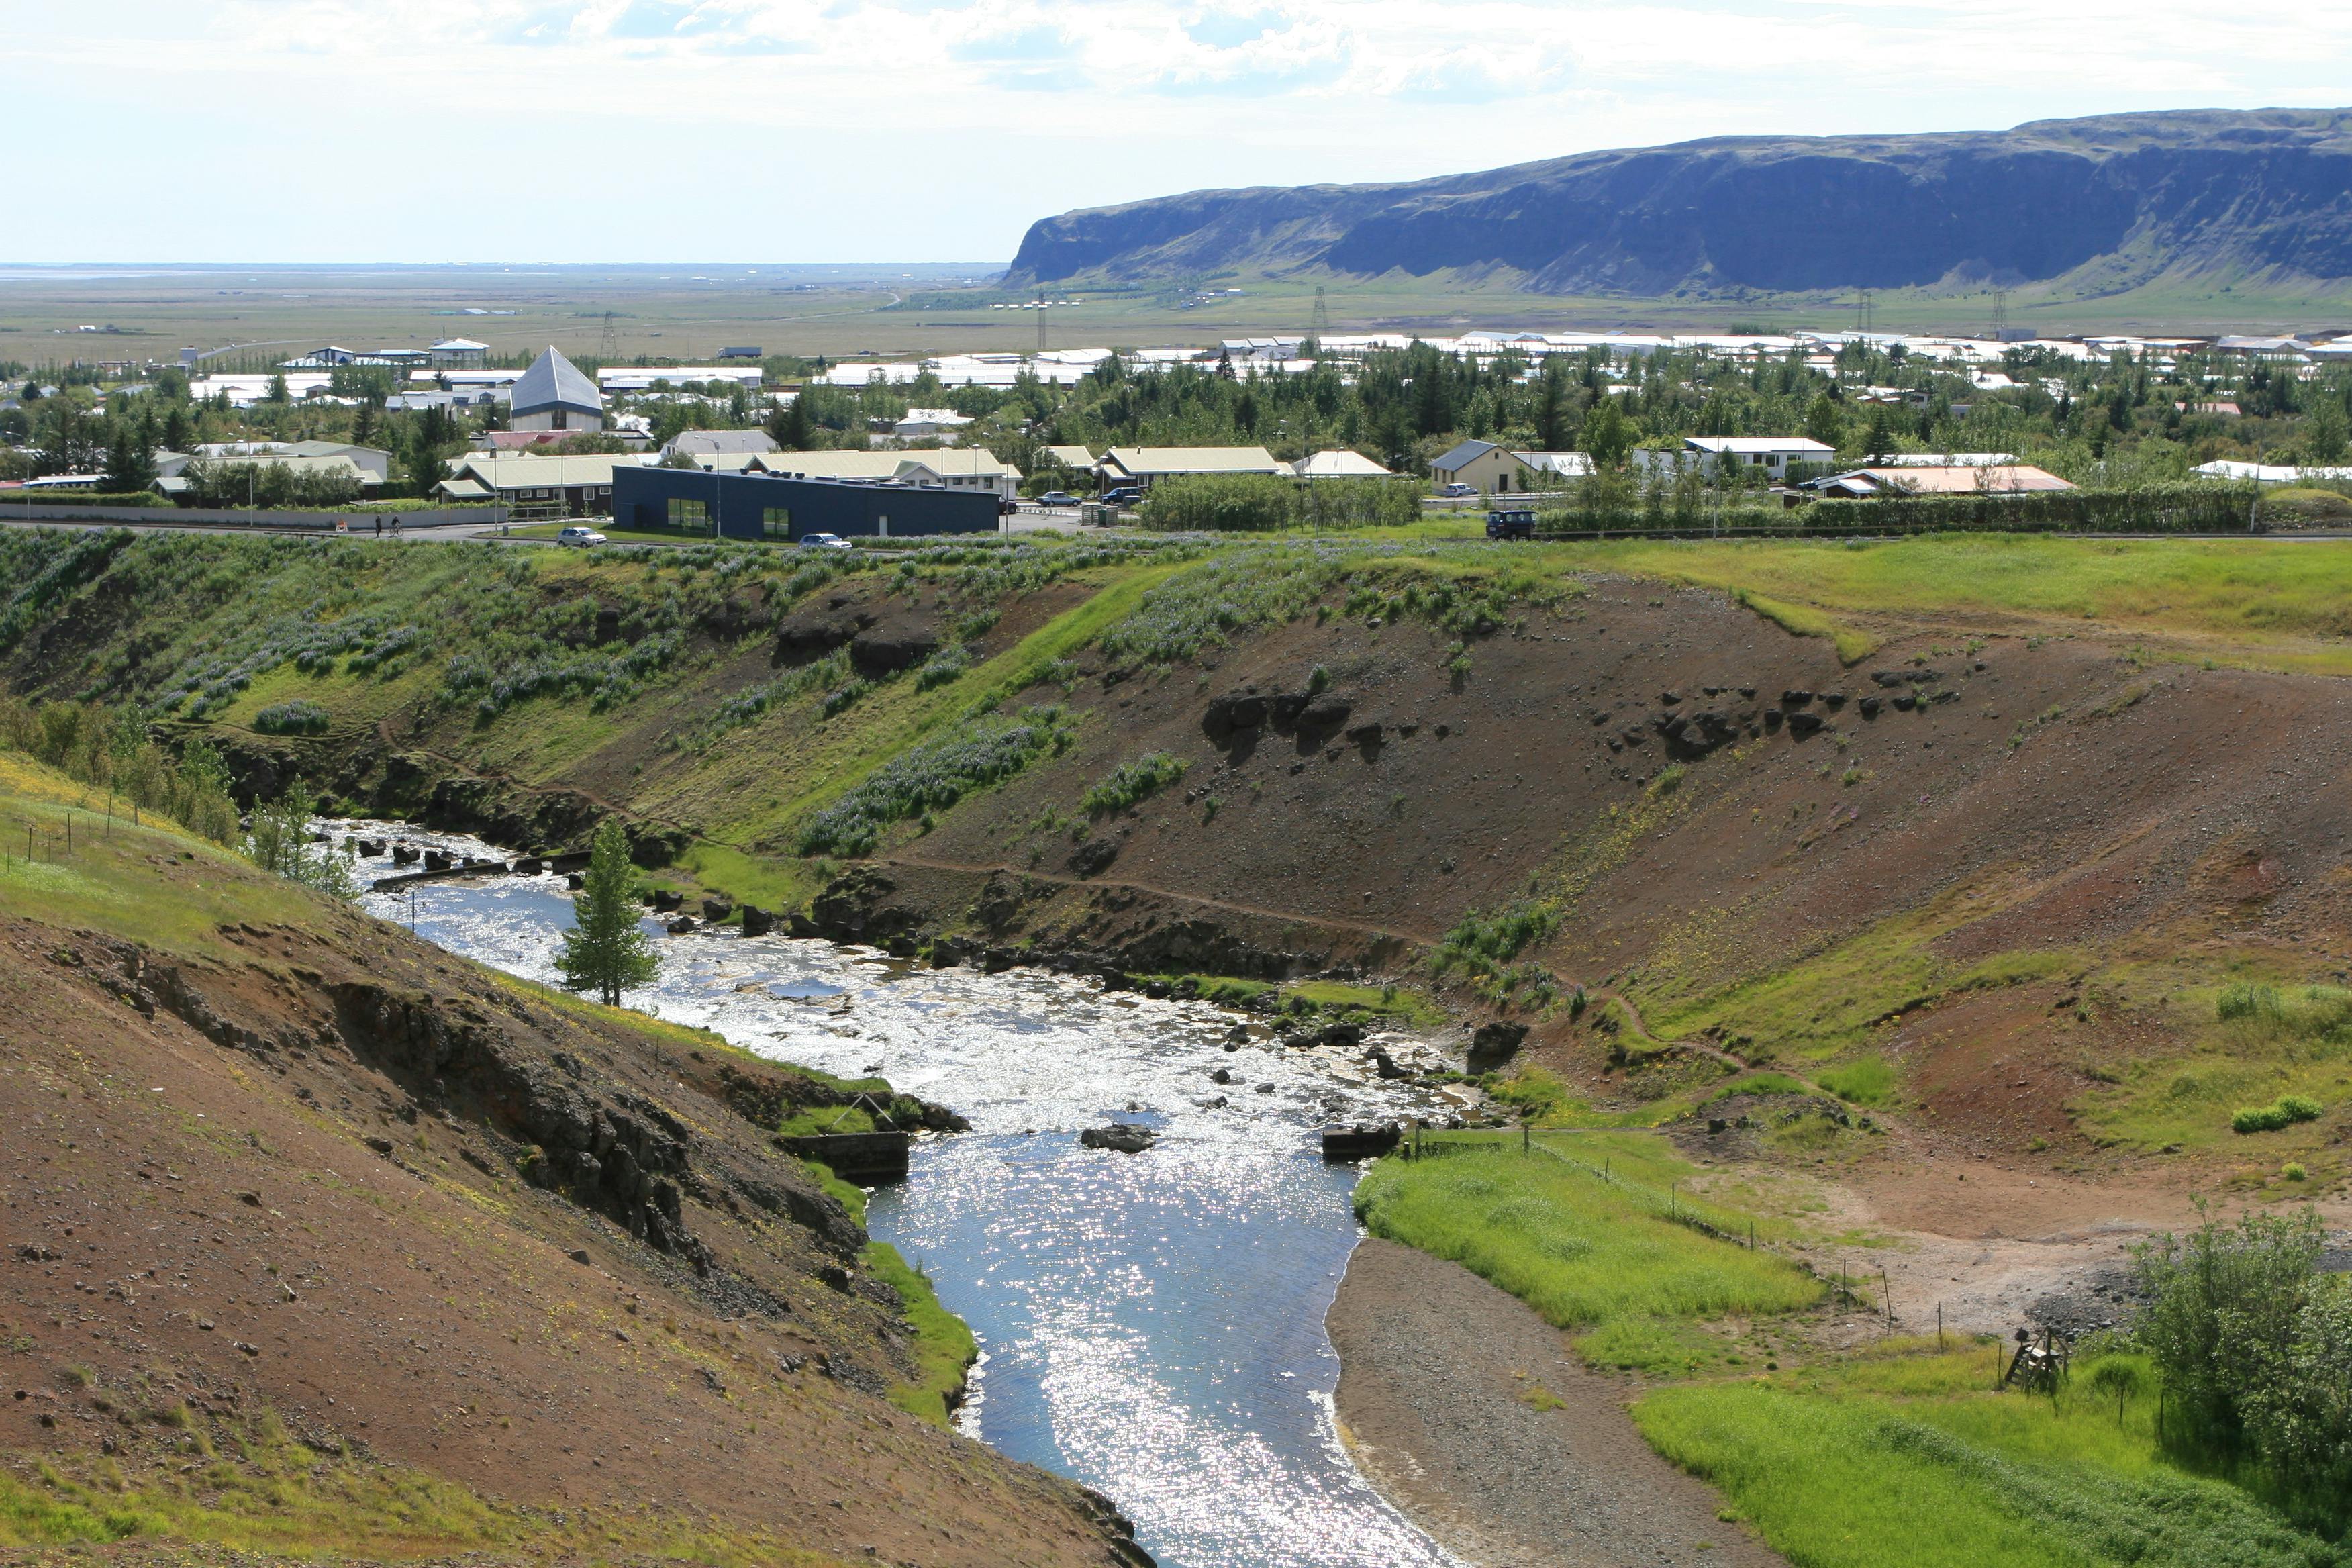 River flowing through the town of Hveragerði in South Iceland